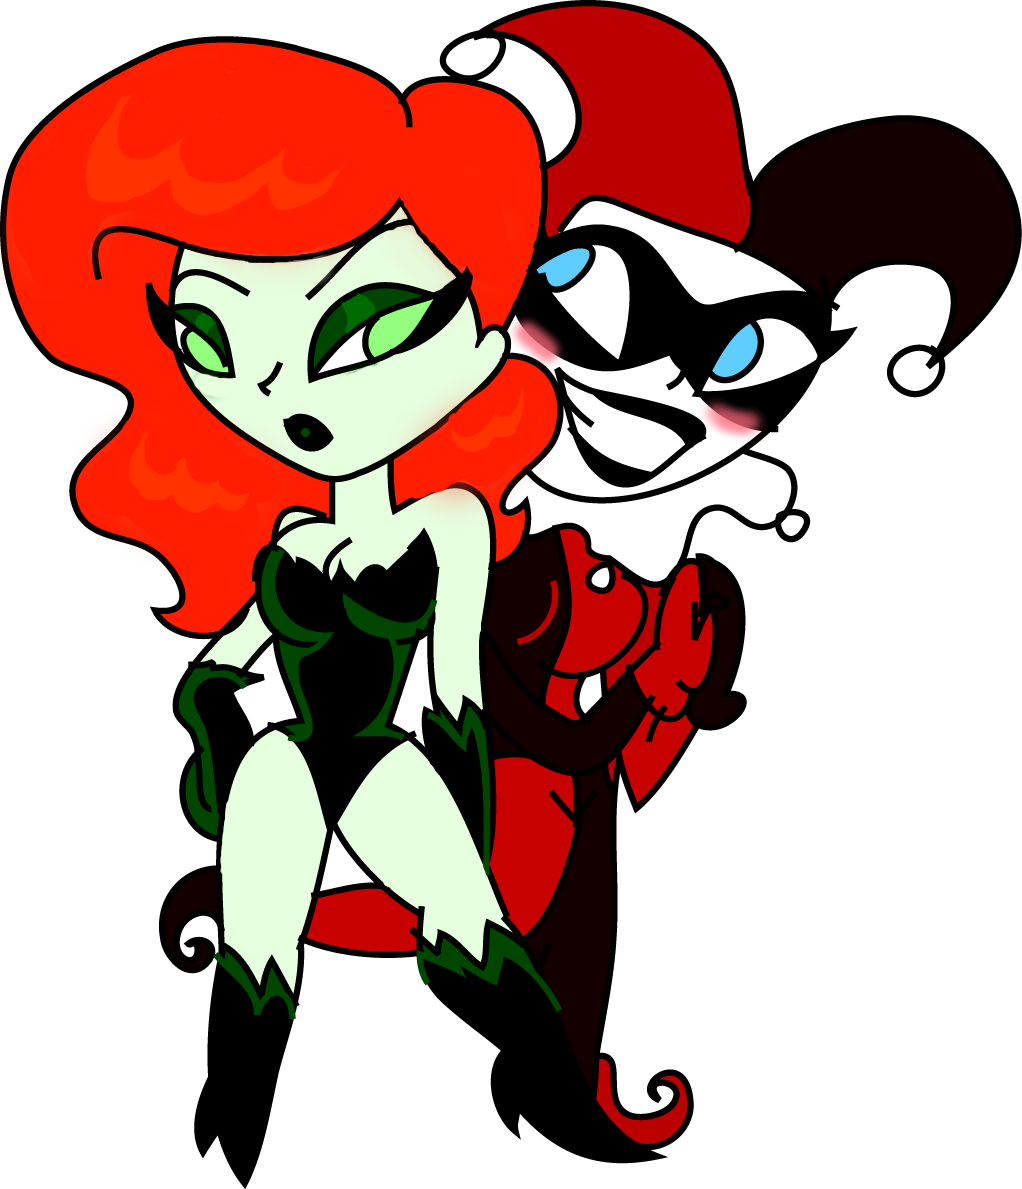 Poison Ivy Harley Quinn By Purfectprincessgirl - Cartoon Characters Poison Ivy And Harley Quinn (1022x1189)